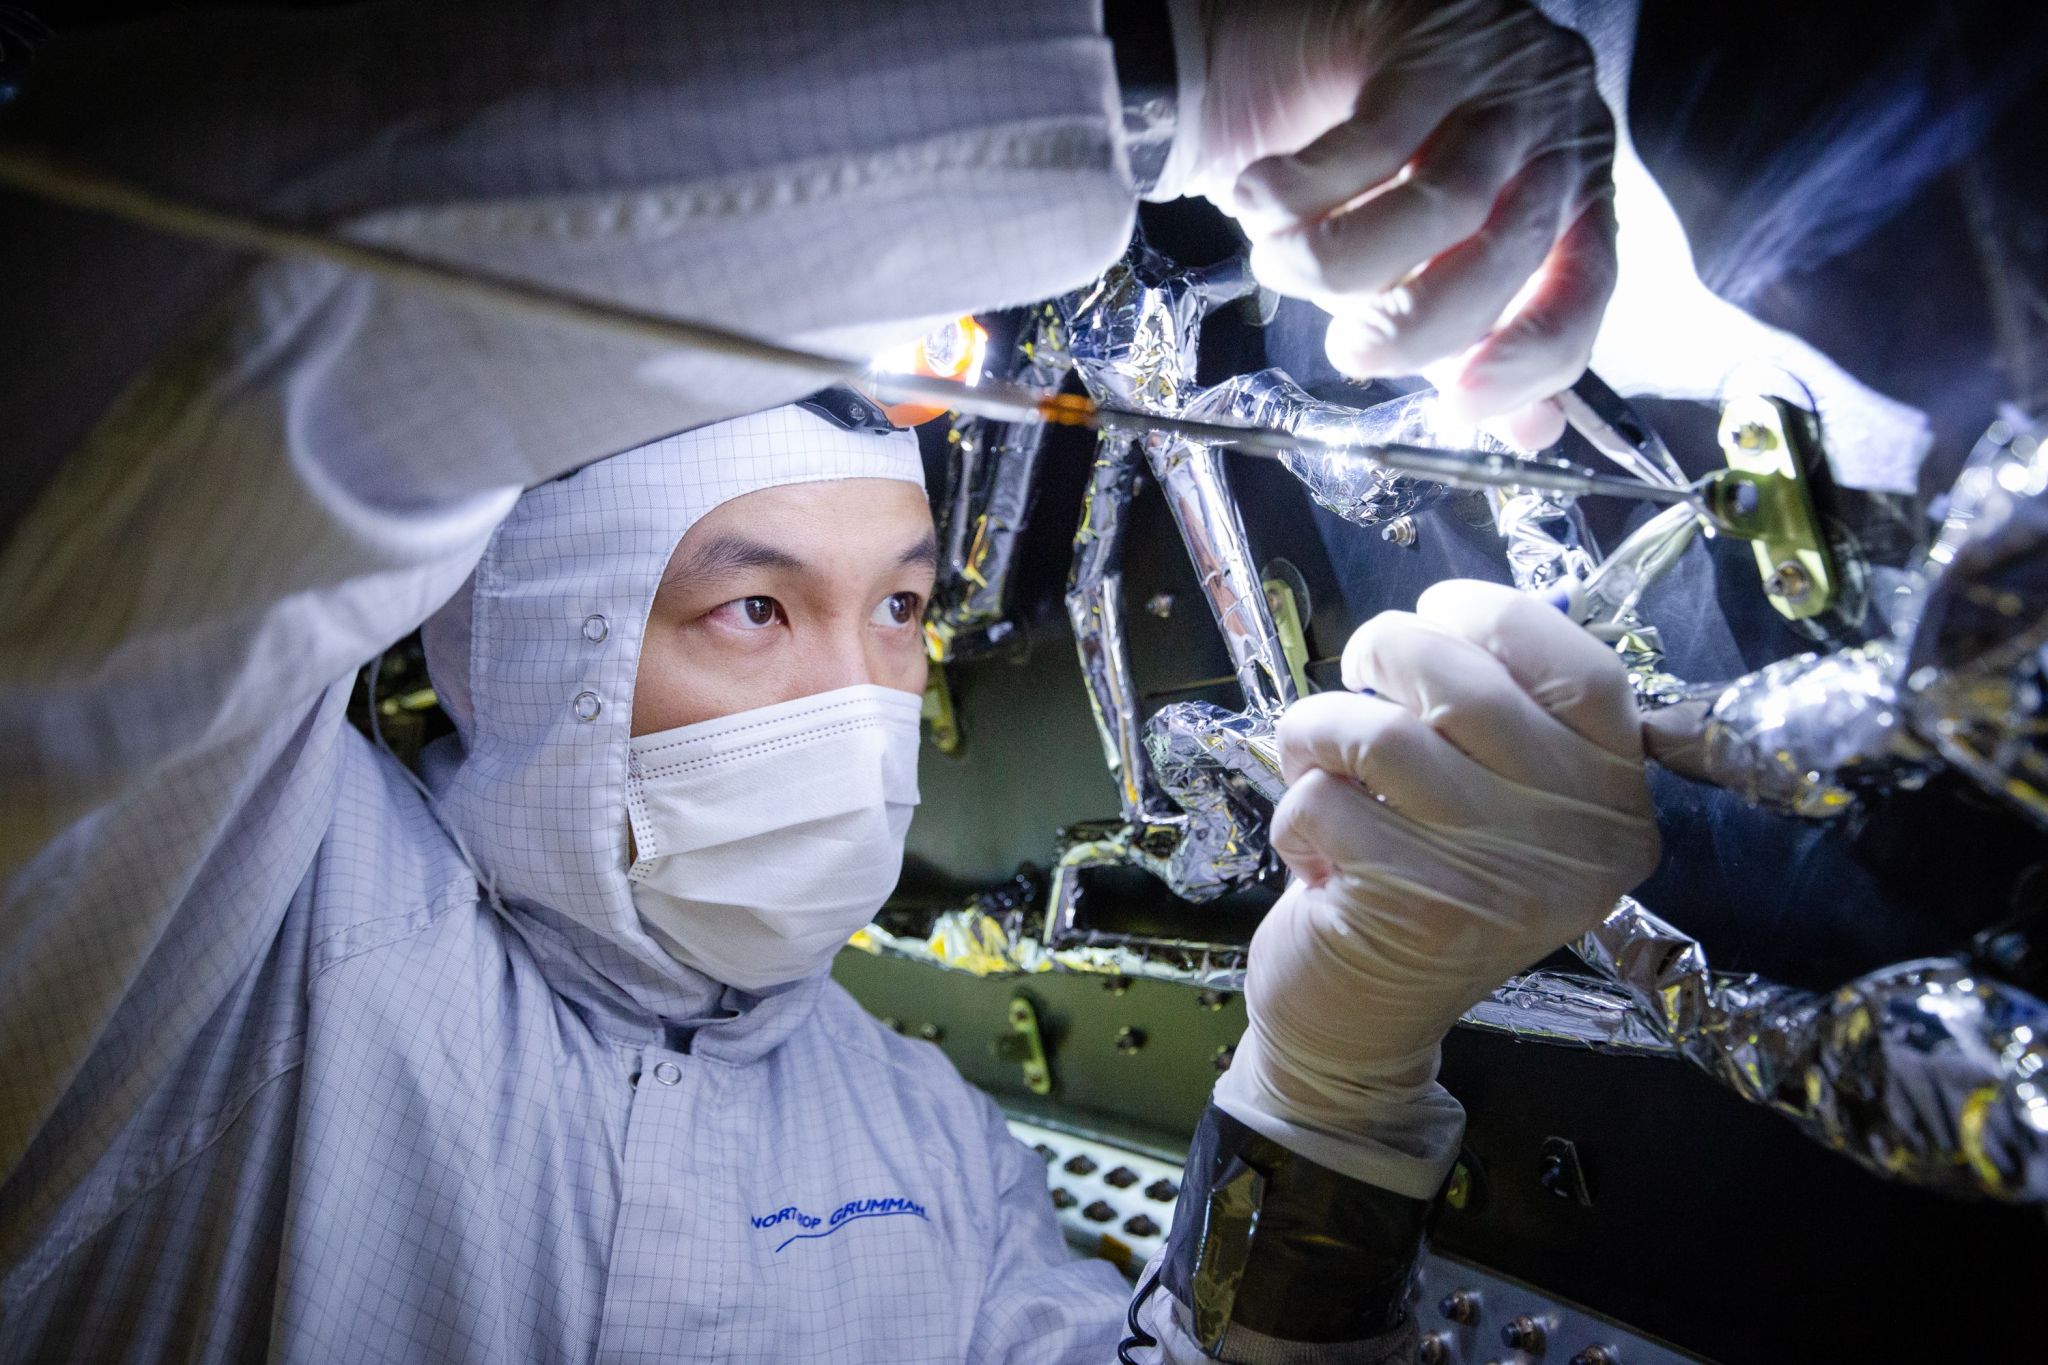 white bunny suit-clad Webb technician in clean room using tools